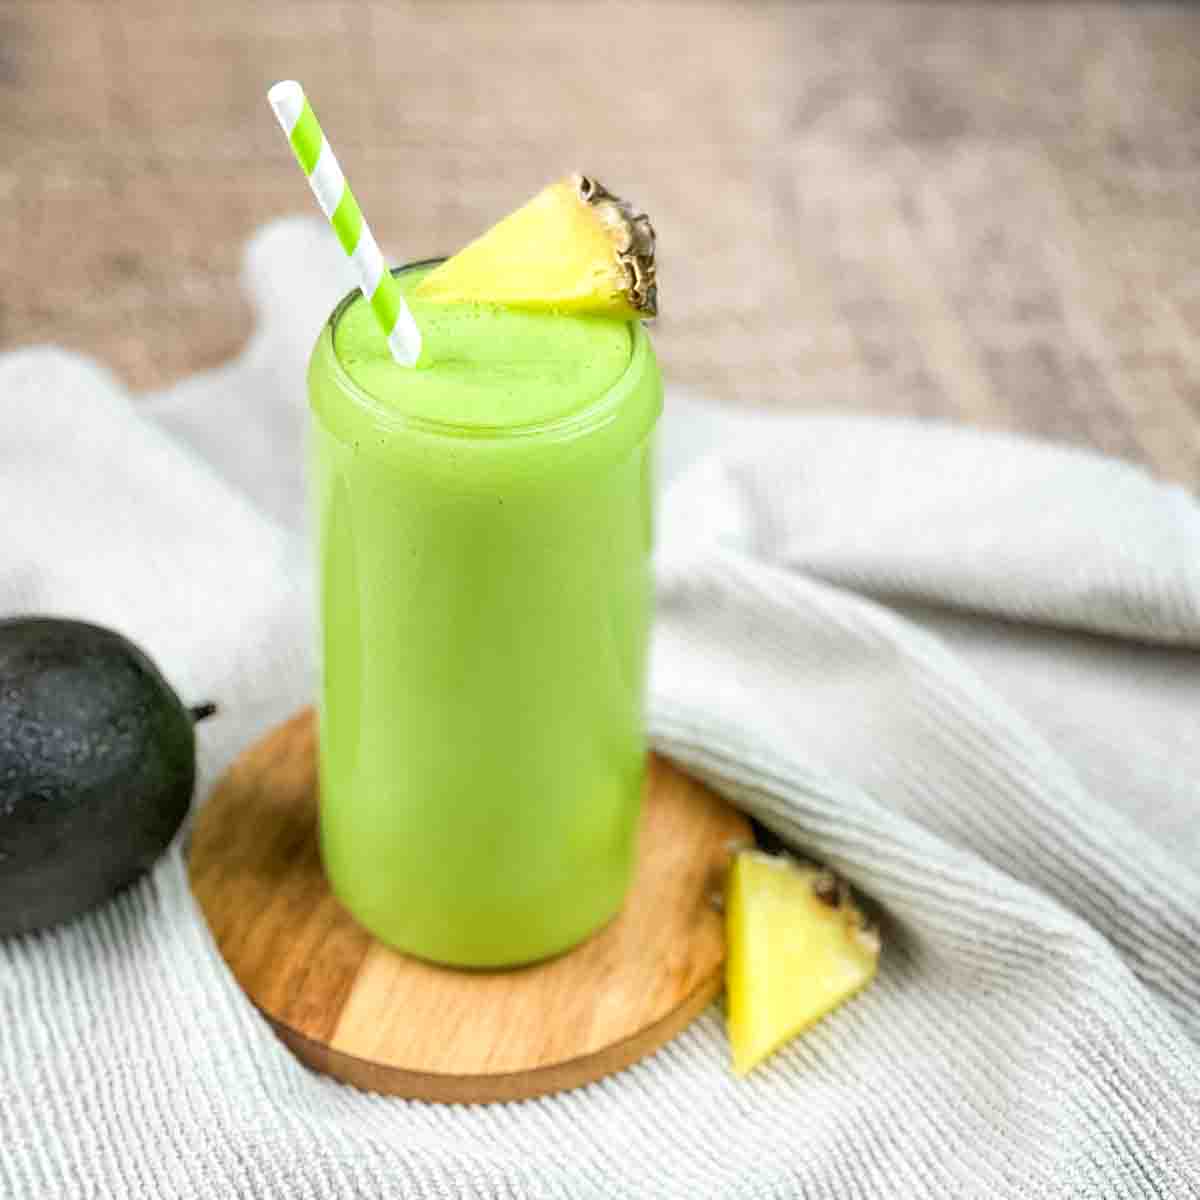 Thick and creamy smoothie in a tall glass with a green and white striped straw.